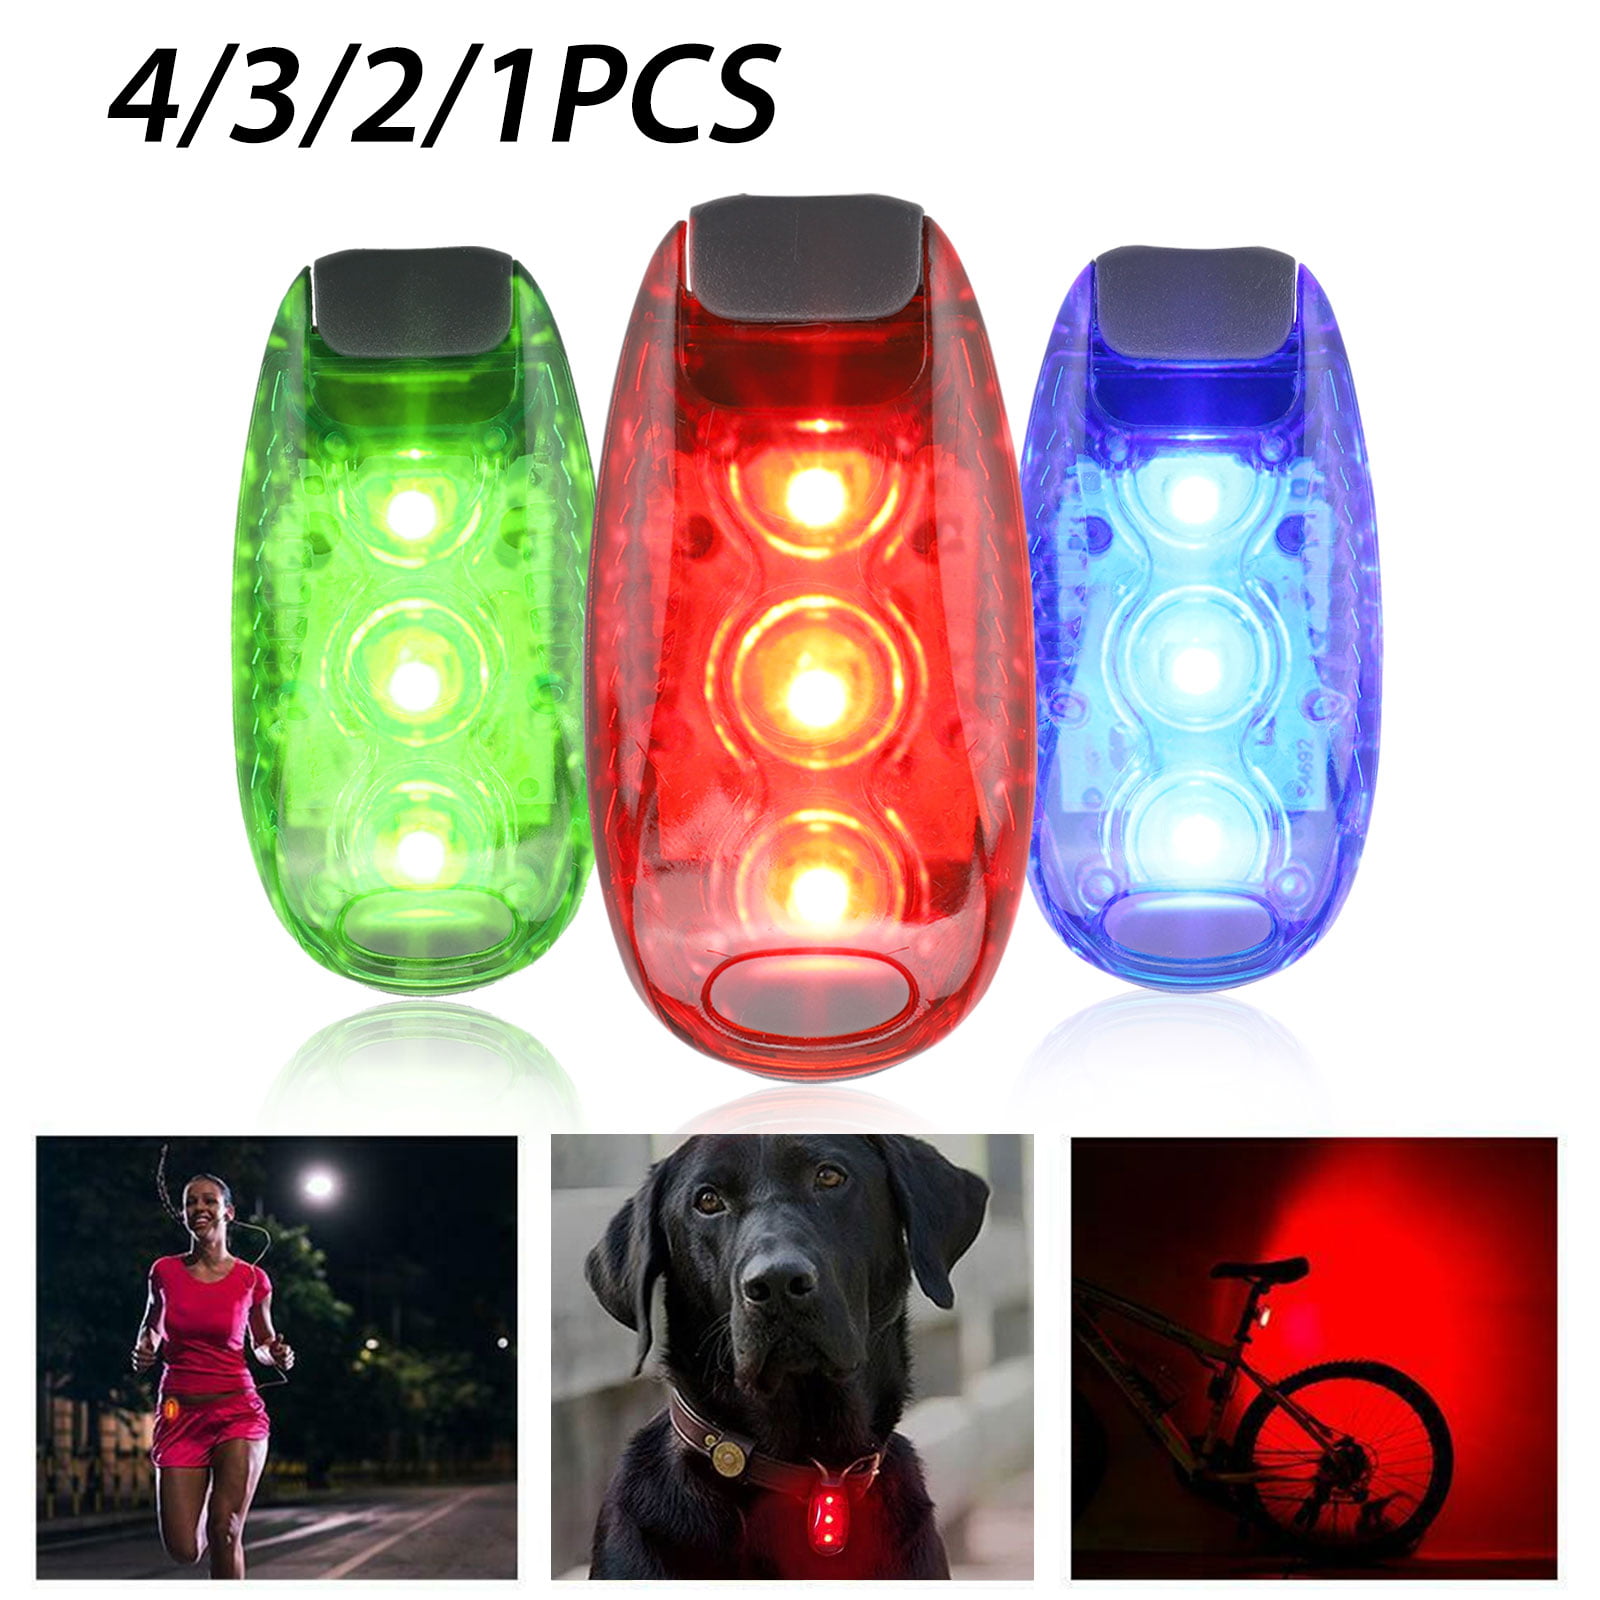 Walking Nighttime Cycling Dogs LED Safety Lights 3 Modes Clip on Strobe/Running Light/Waterproof Bike Rear Tail Light/Flashing Dog Collar with Clip on Velcro Straps for Running